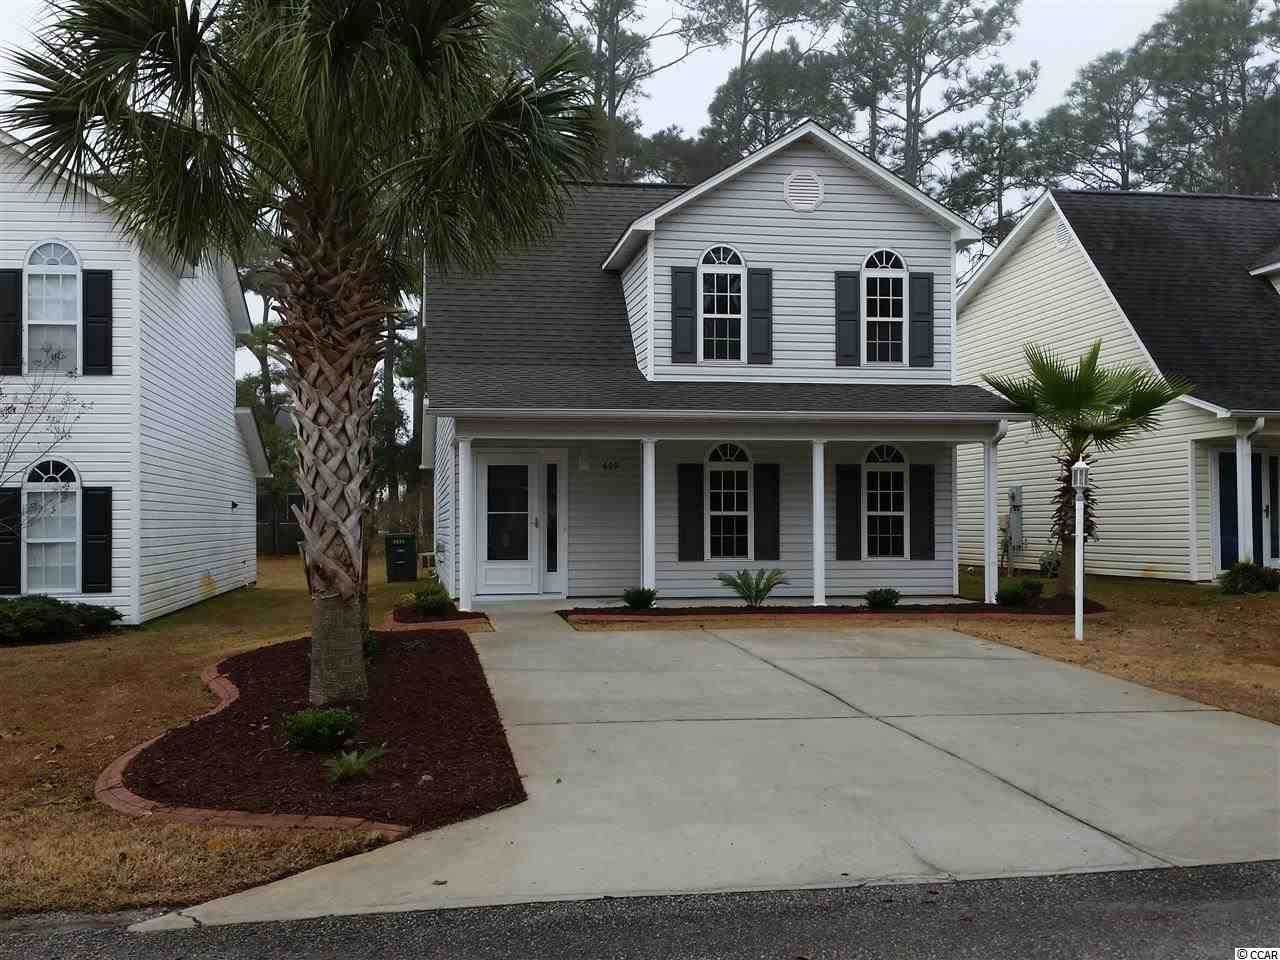 609 S 23rd Ave. N North Myrtle Beach, SC 29582